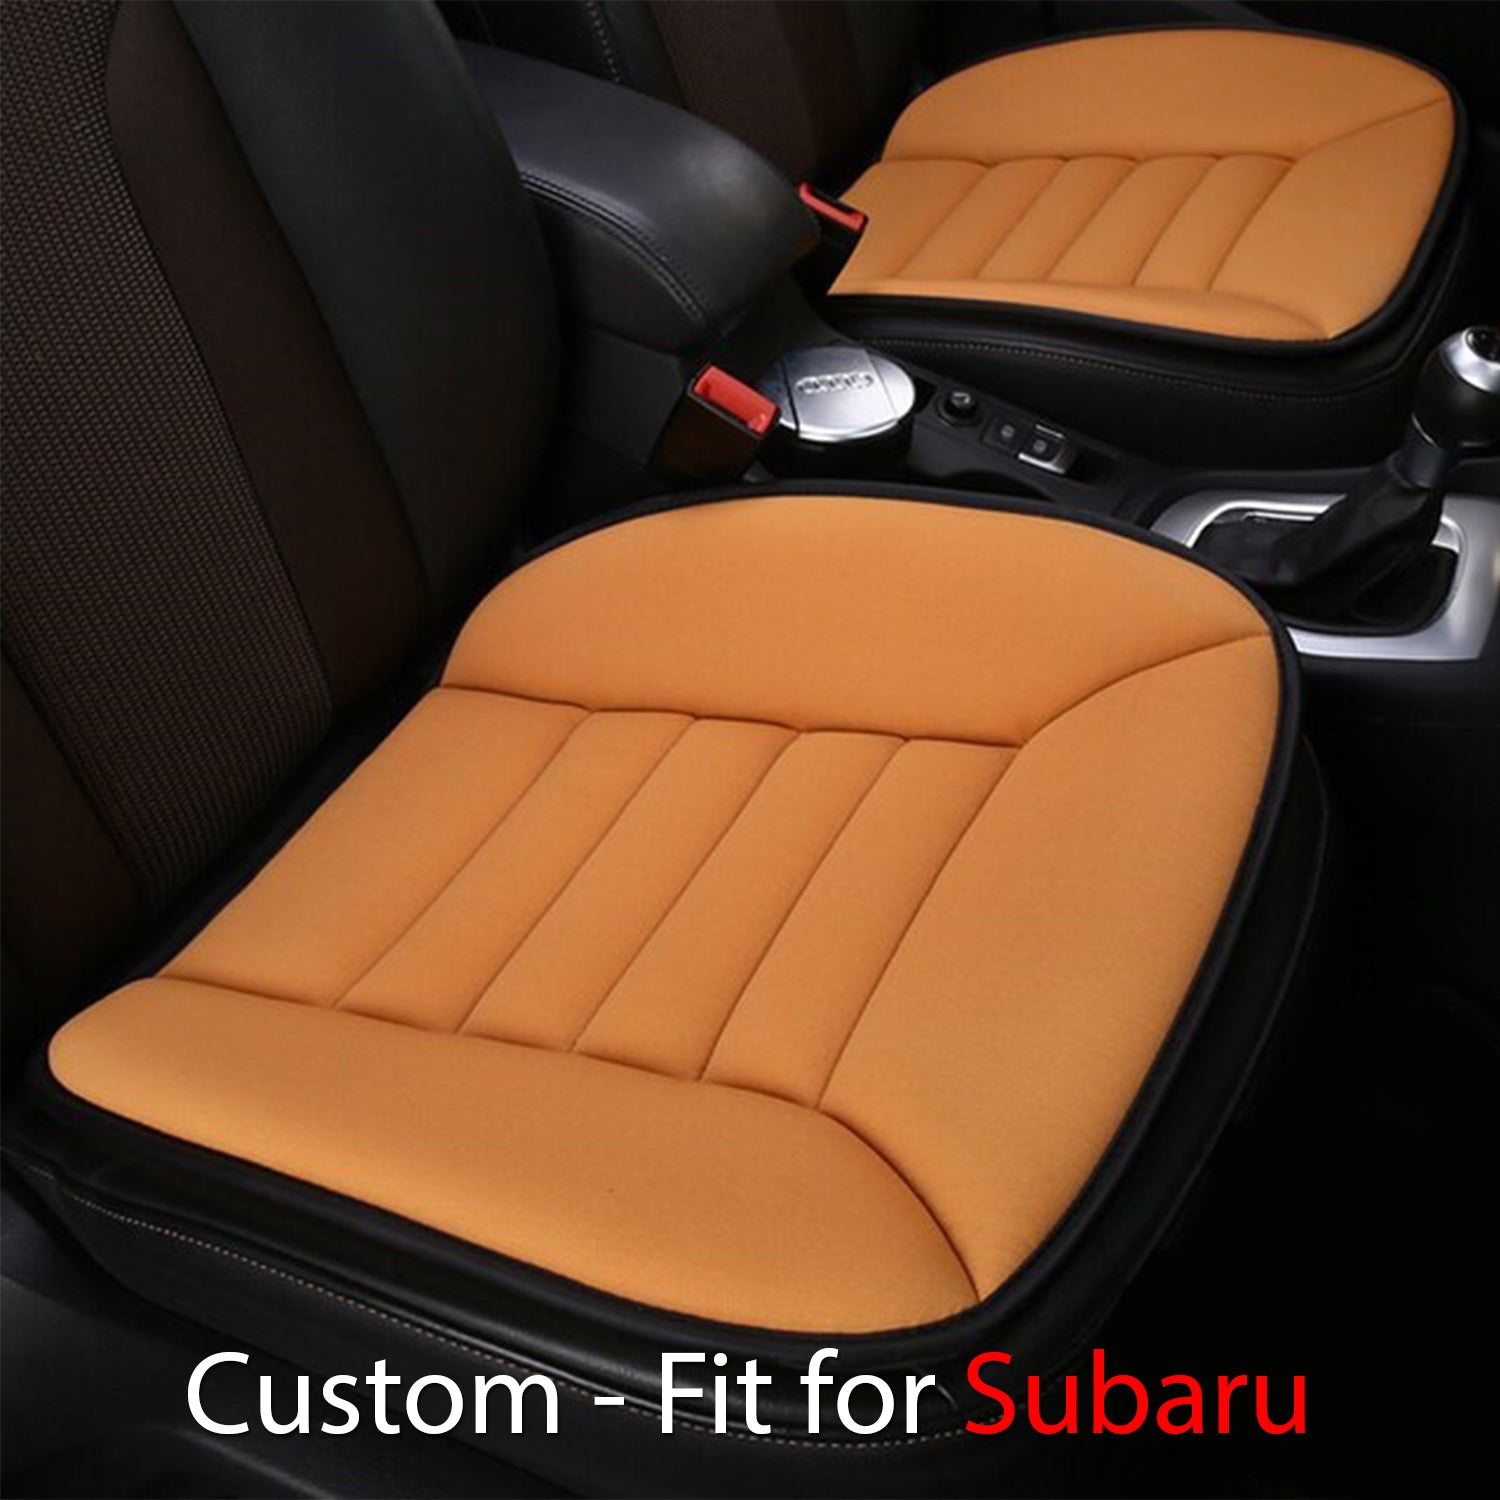 Car Seat Cushion with 1.2inch Comfort Memory Foam, Custom-Fit For Car, Seat Cushion for Car and Office Chair DLTS247